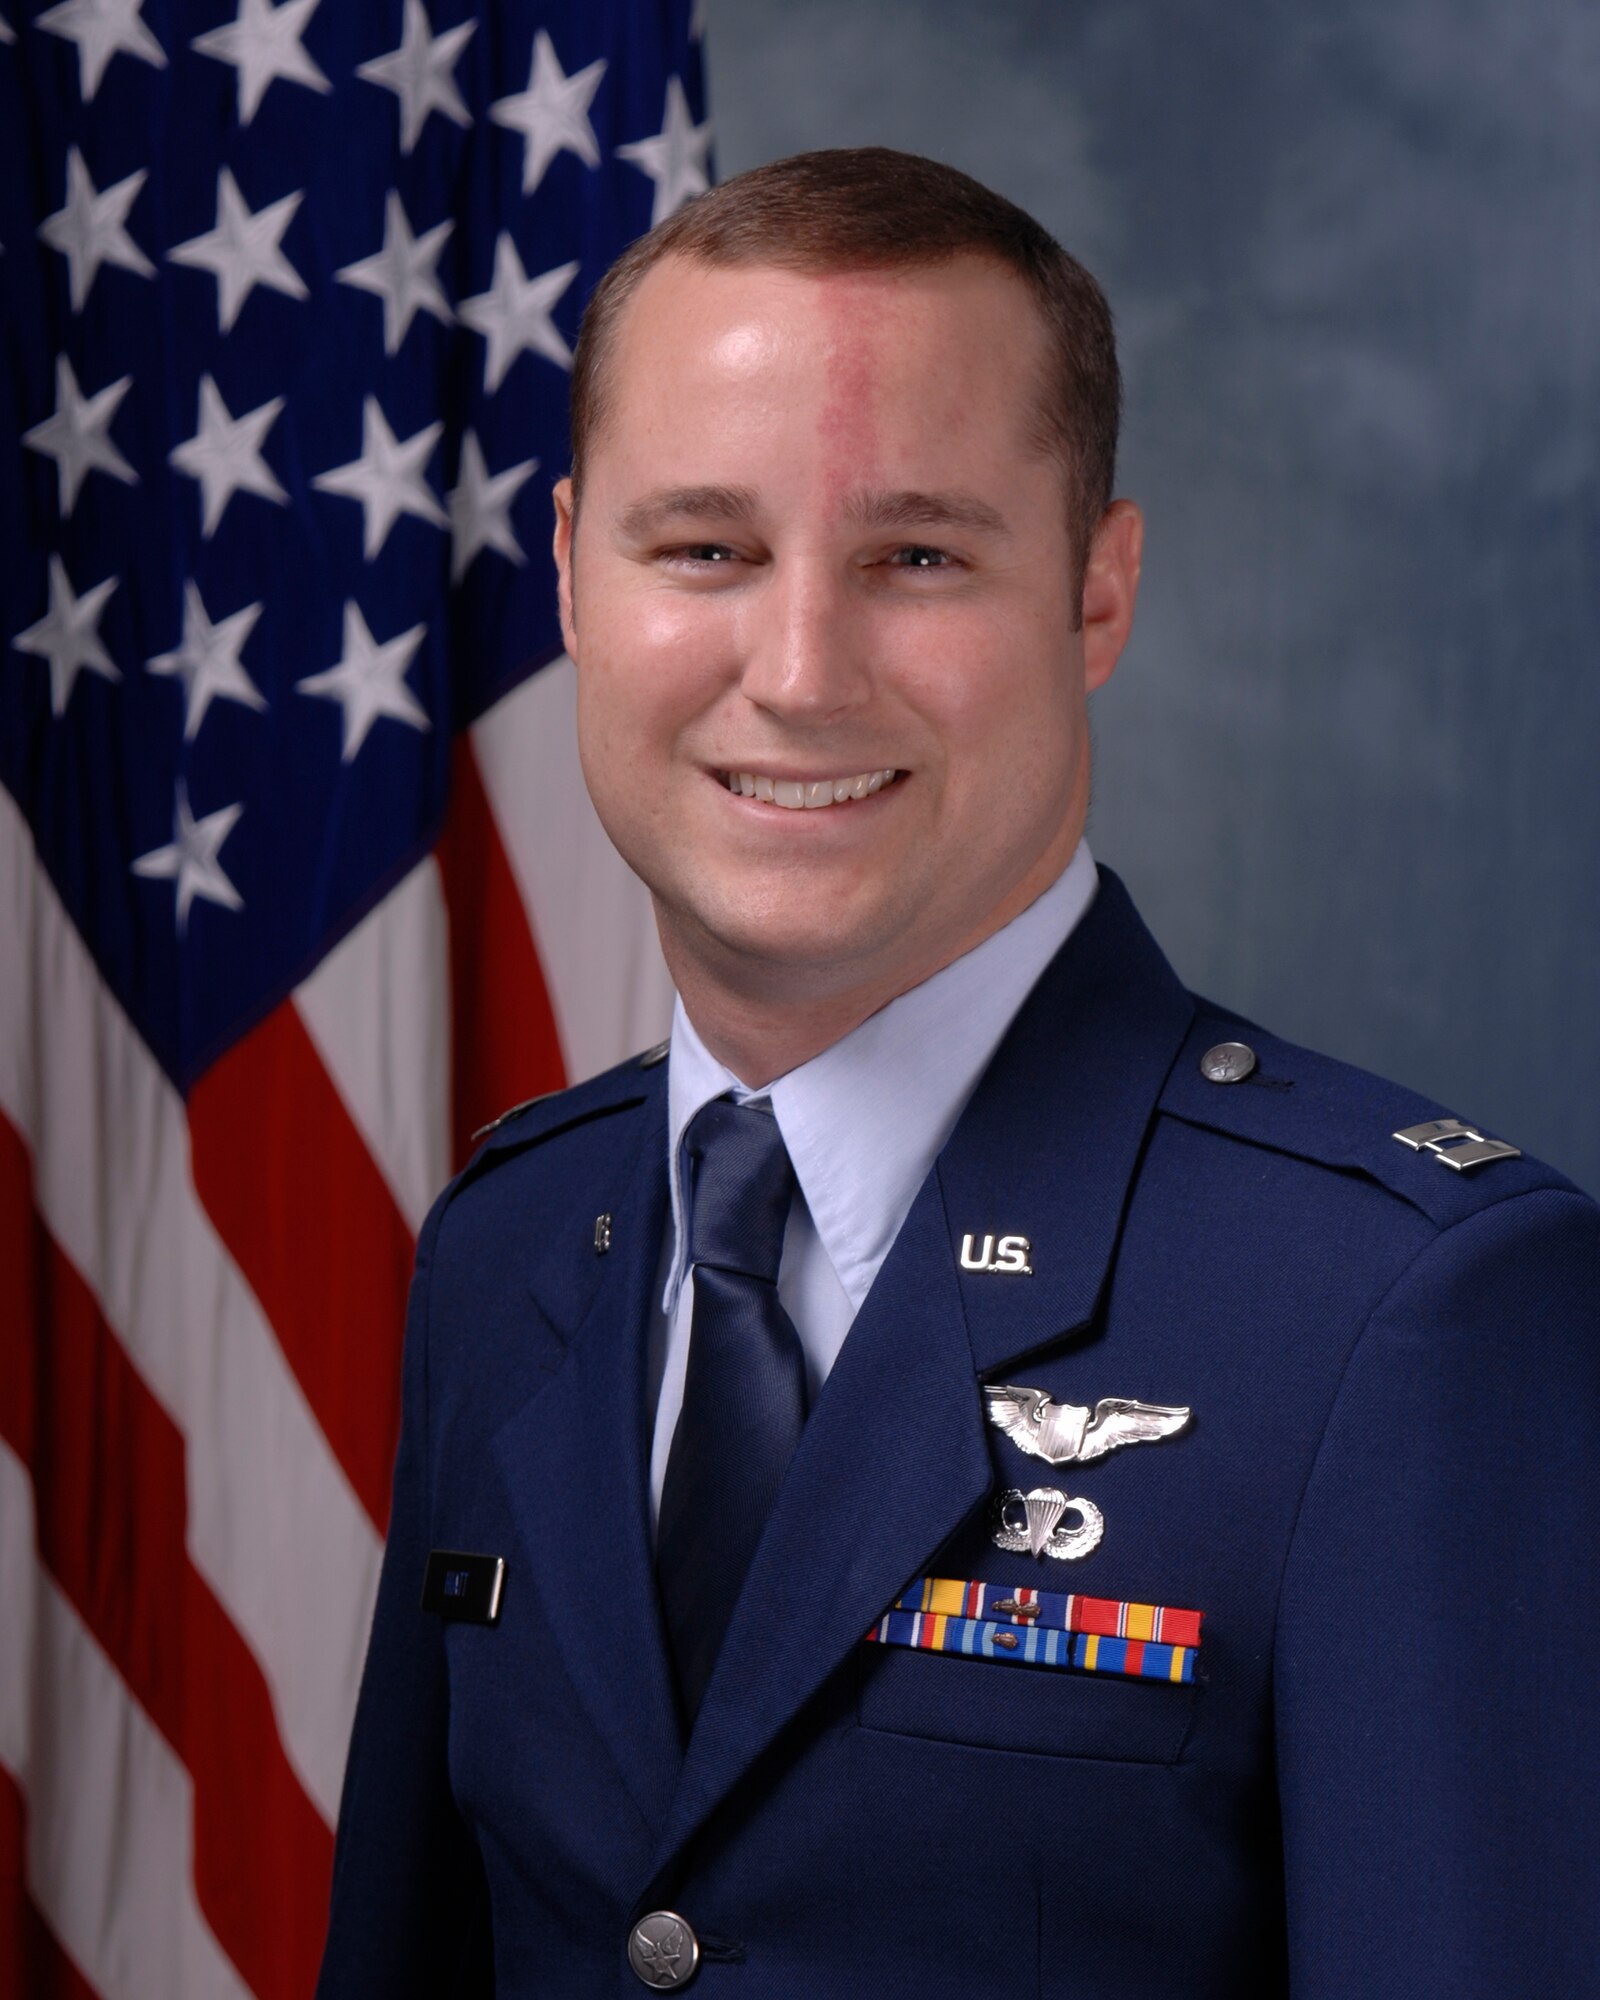 Capt. Michael Hiatt, 85th Test and Evaluation Squadron, Eglin AFB, Fla., received the Aviation Safety Well Done Award for outstanding airmanship and professional performance during a hazardous situation and for a significant contribution to the Air Force mishap prevention program. (U.S. Air Force photo)